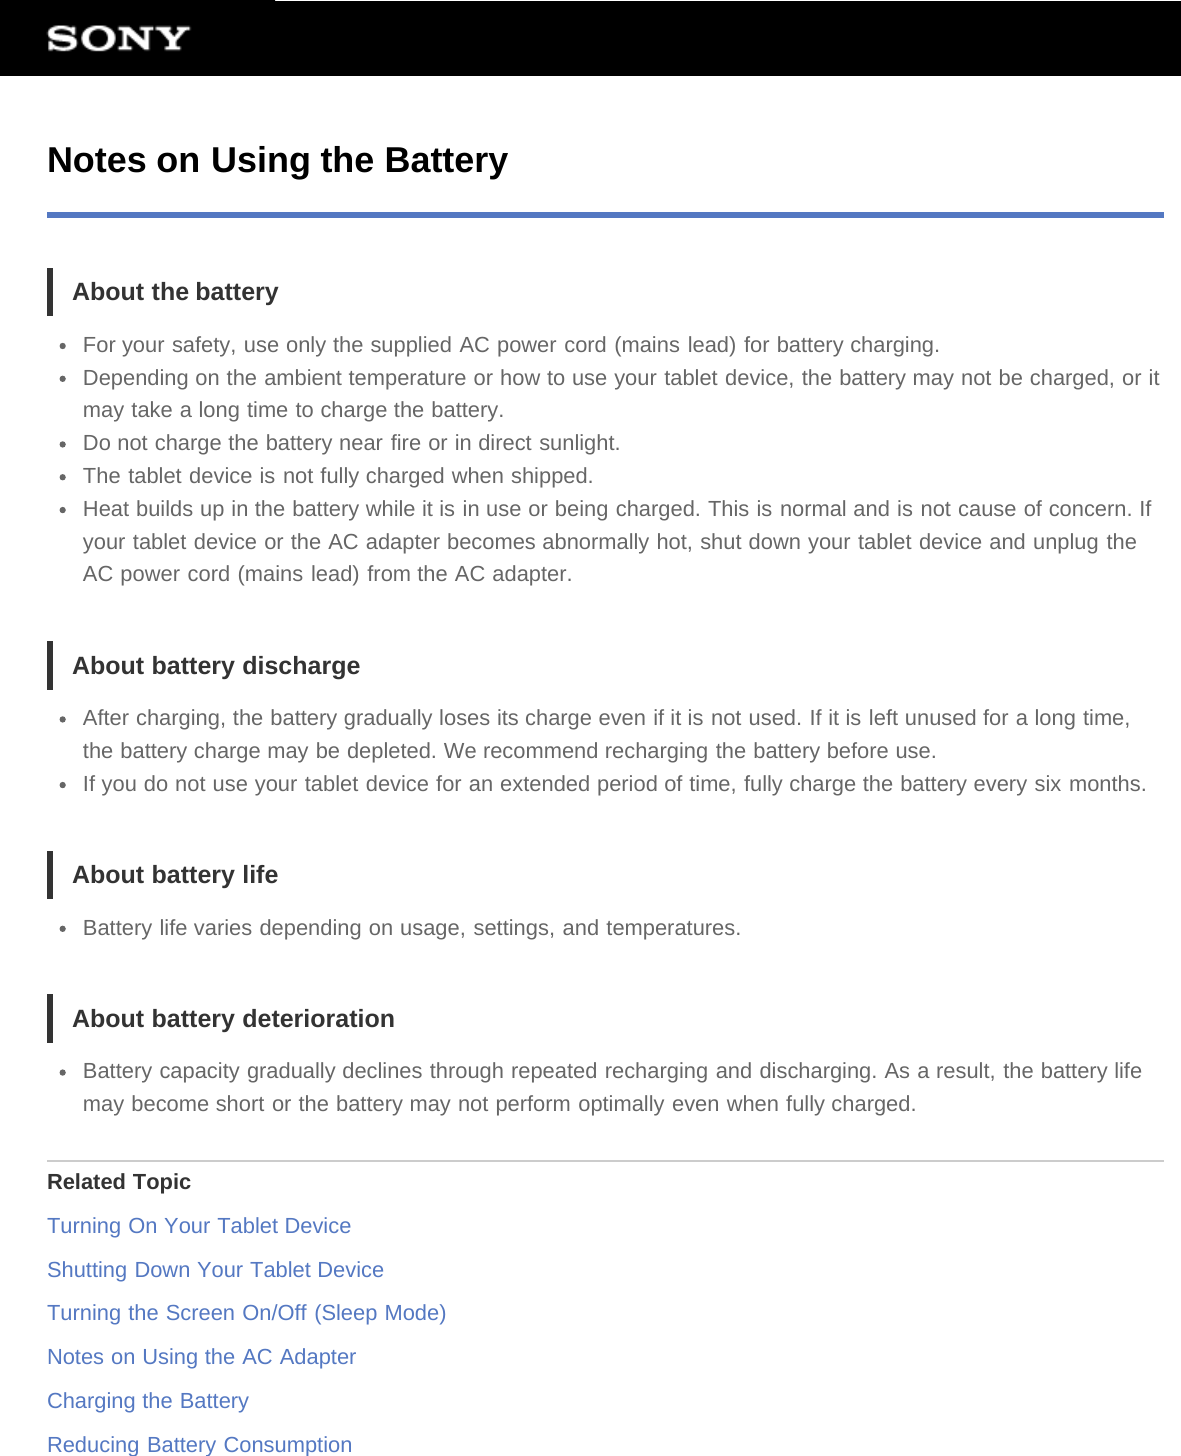 Notes on Using the BatteryAbout the batteryFor your safety, use only the supplied AC power cord (mains lead) for battery charging.Depending on the ambient temperature or how to use your tablet device, the battery may not be charged, or itmay take a long time to charge the battery.Do not charge the battery near fire or in direct sunlight.The tablet device is not fully charged when shipped.Heat builds up in the battery while it is in use or being charged. This is normal and is not cause of concern. Ifyour tablet device or the AC adapter becomes abnormally hot, shut down your tablet device and unplug theAC power cord (mains lead) from the AC adapter.About battery dischargeAfter charging, the battery gradually loses its charge even if it is not used. If it is left unused for a long time,the battery charge may be depleted. We recommend recharging the battery before use.If you do not use your tablet device for an extended period of time, fully charge the battery every six months.About battery lifeBattery life varies depending on usage, settings, and temperatures.About battery deteriorationBattery capacity gradually declines through repeated recharging and discharging. As a result, the battery lifemay become short or the battery may not perform optimally even when fully charged.Related TopicTurning On Your Tablet DeviceShutting Down Your Tablet DeviceTurning the Screen On/Off (Sleep Mode)Notes on Using the AC AdapterCharging the BatteryReducing Battery Consumption